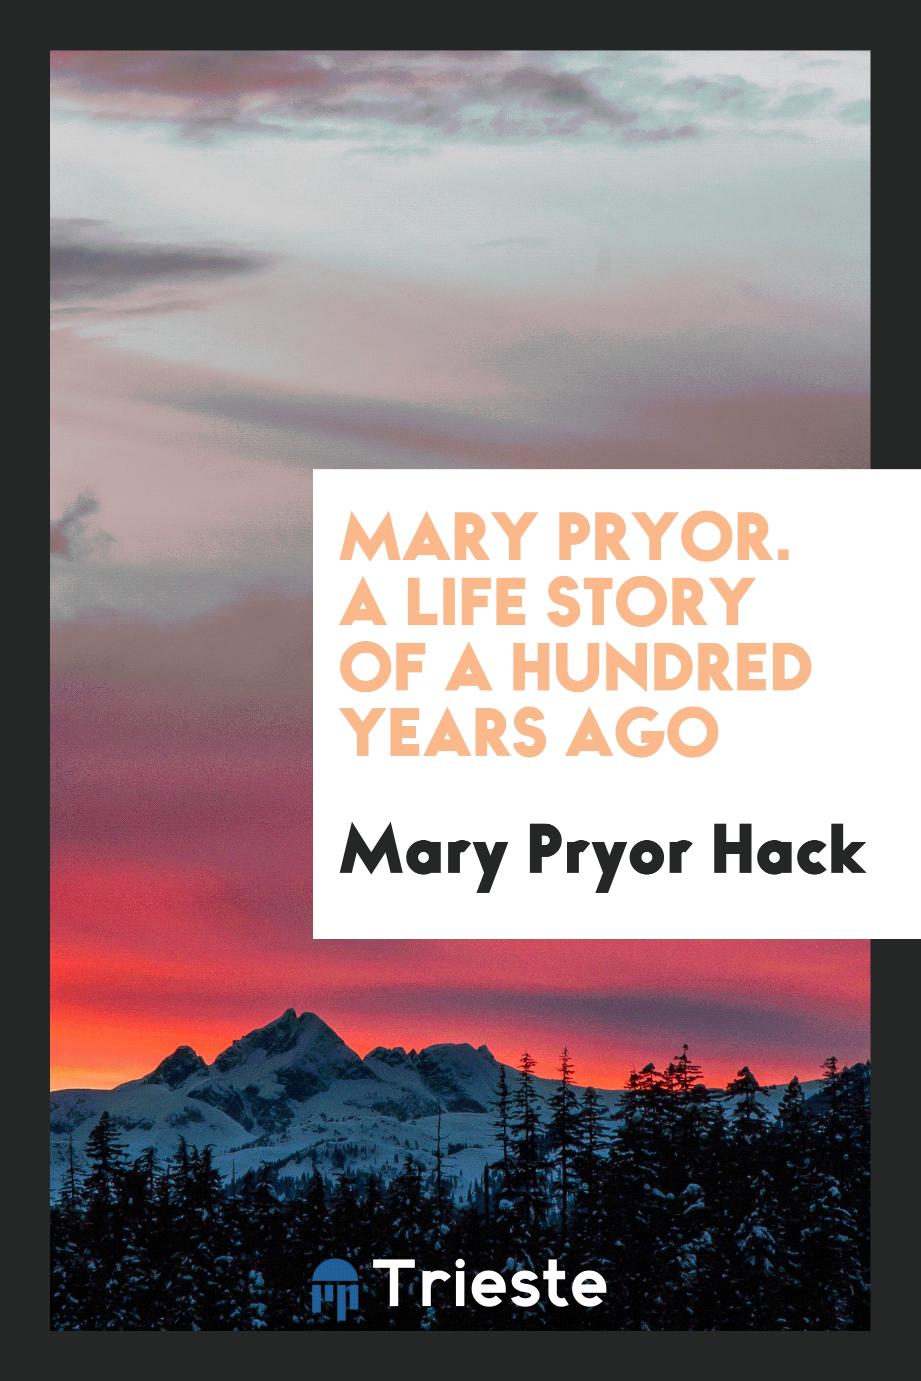 Mary Pryor. A Life Story of a Hundred Years Ago